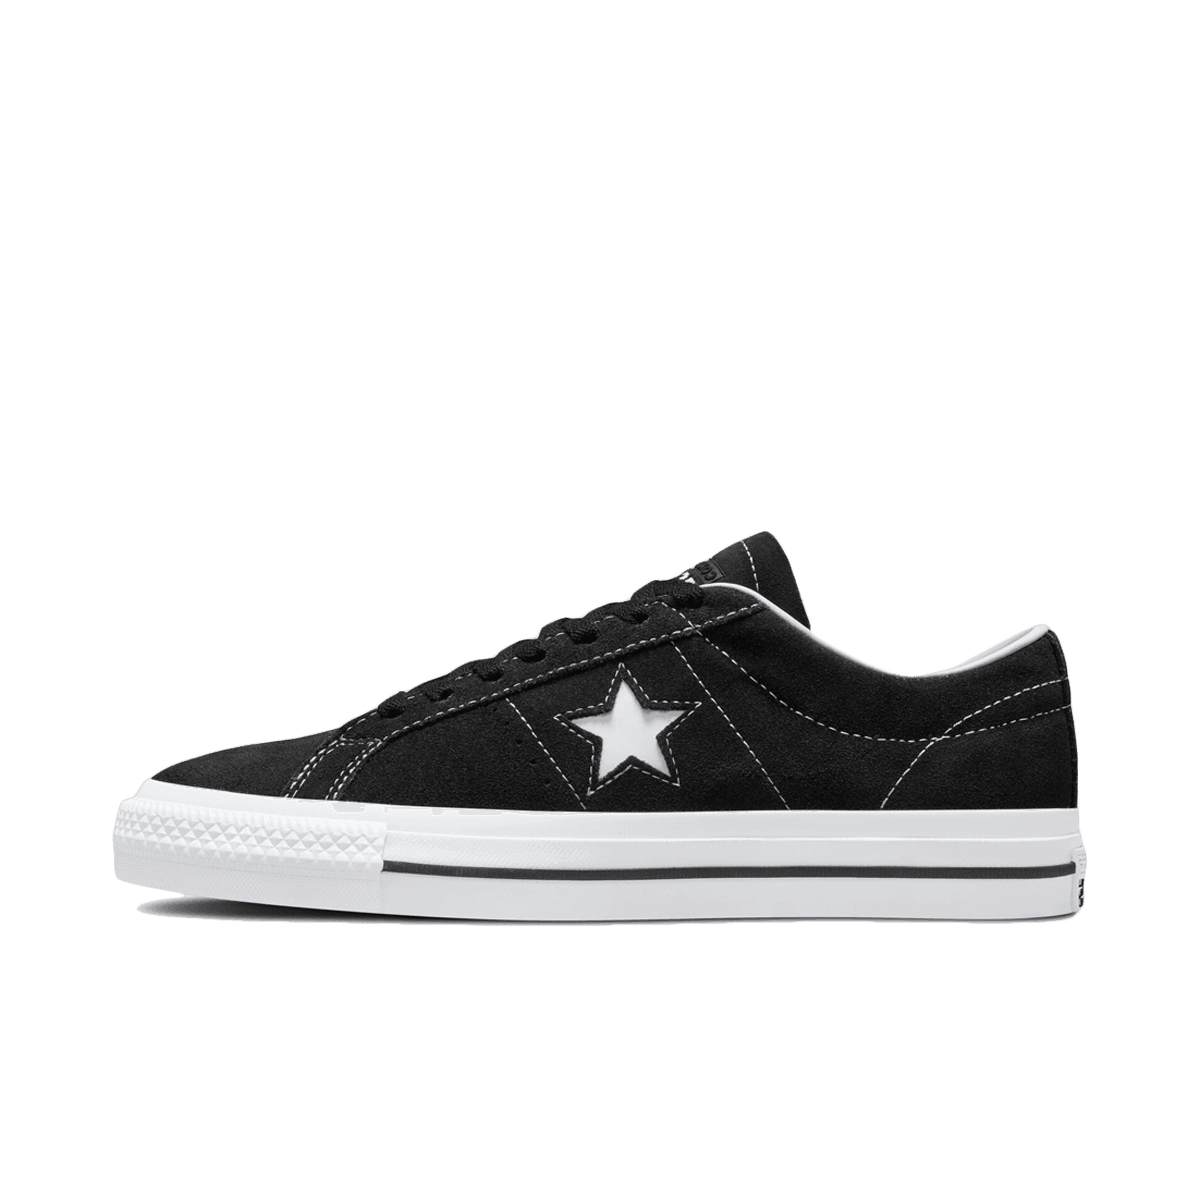 Converse One Star Pro Suede 'Black'